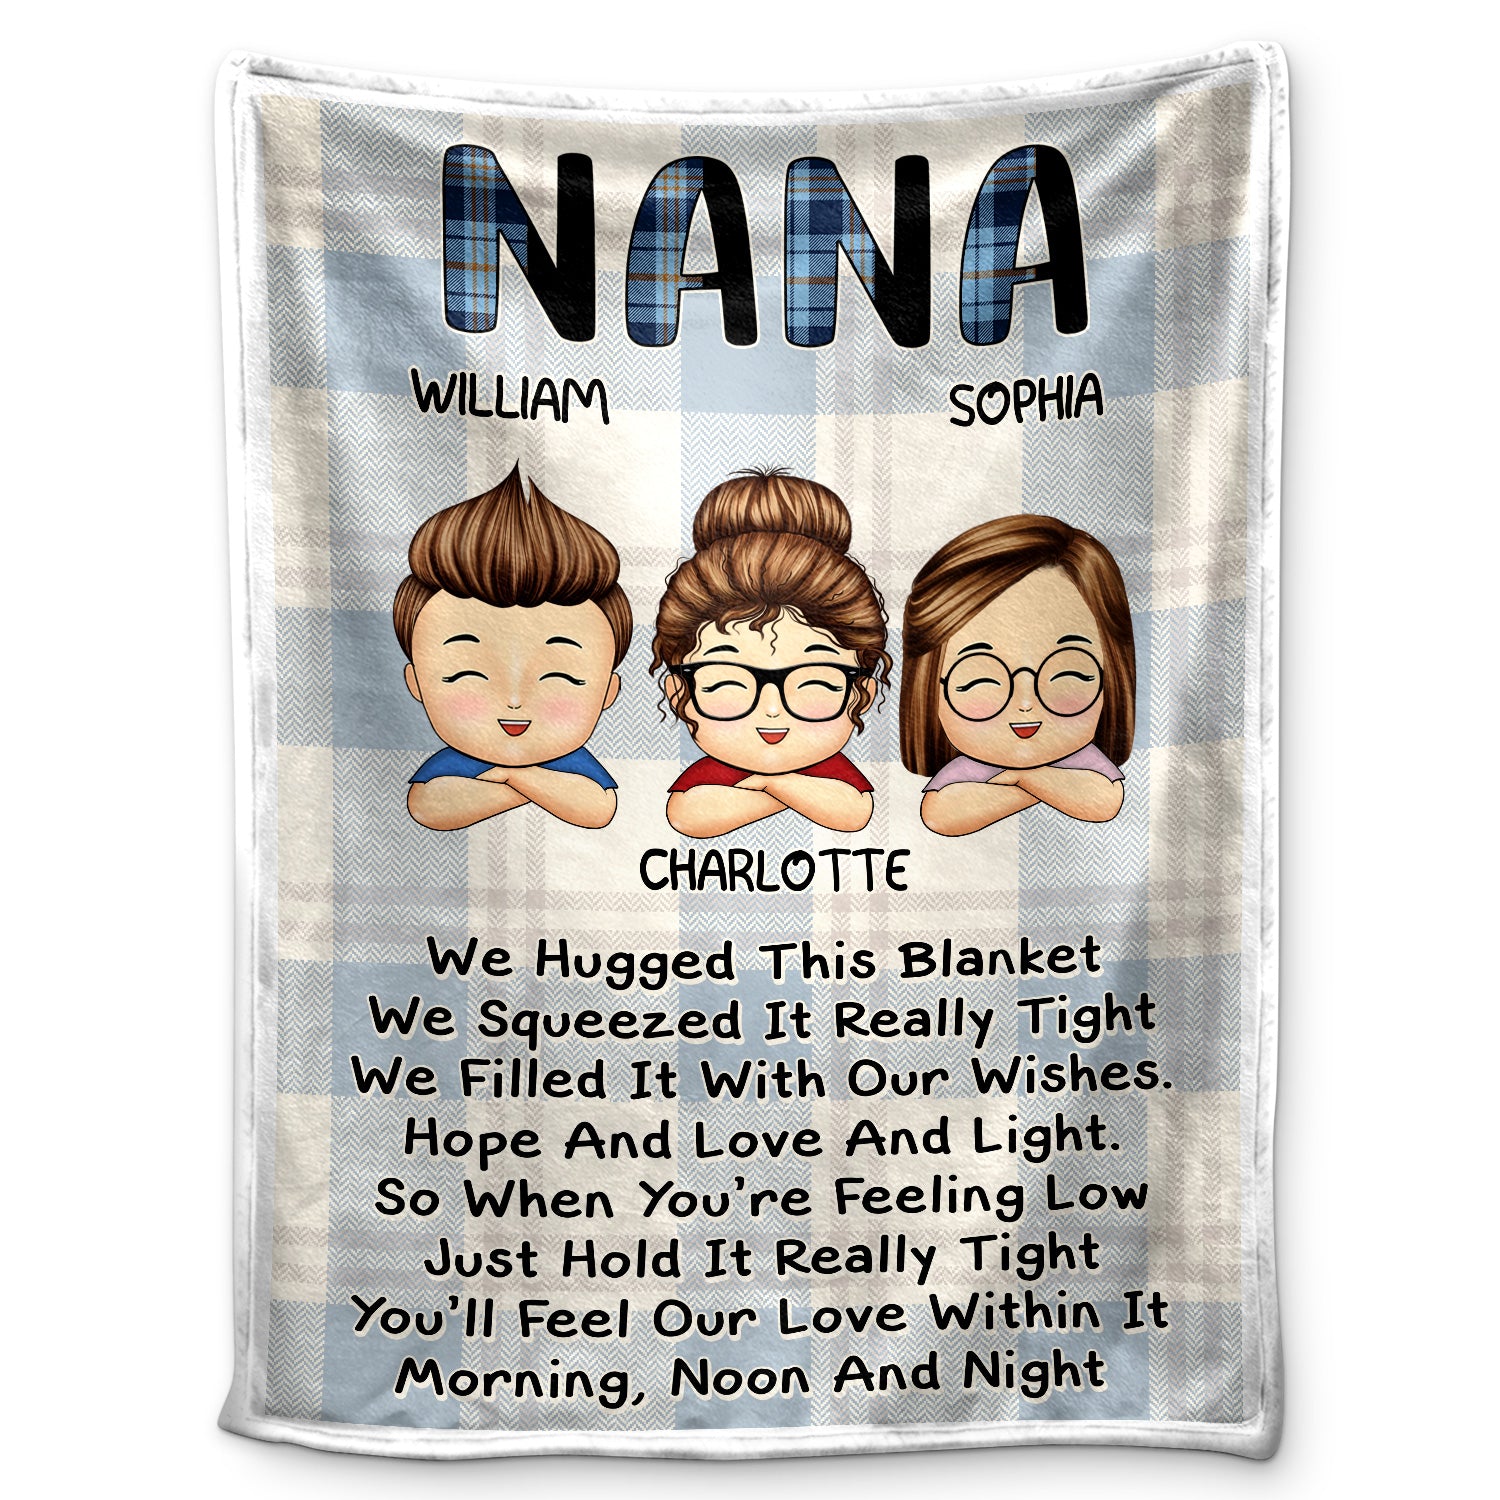 We Filled It With Our Wishes - Loving Gifts For Grandma, Grandmother, Mom - Personalized Fleece Blanket